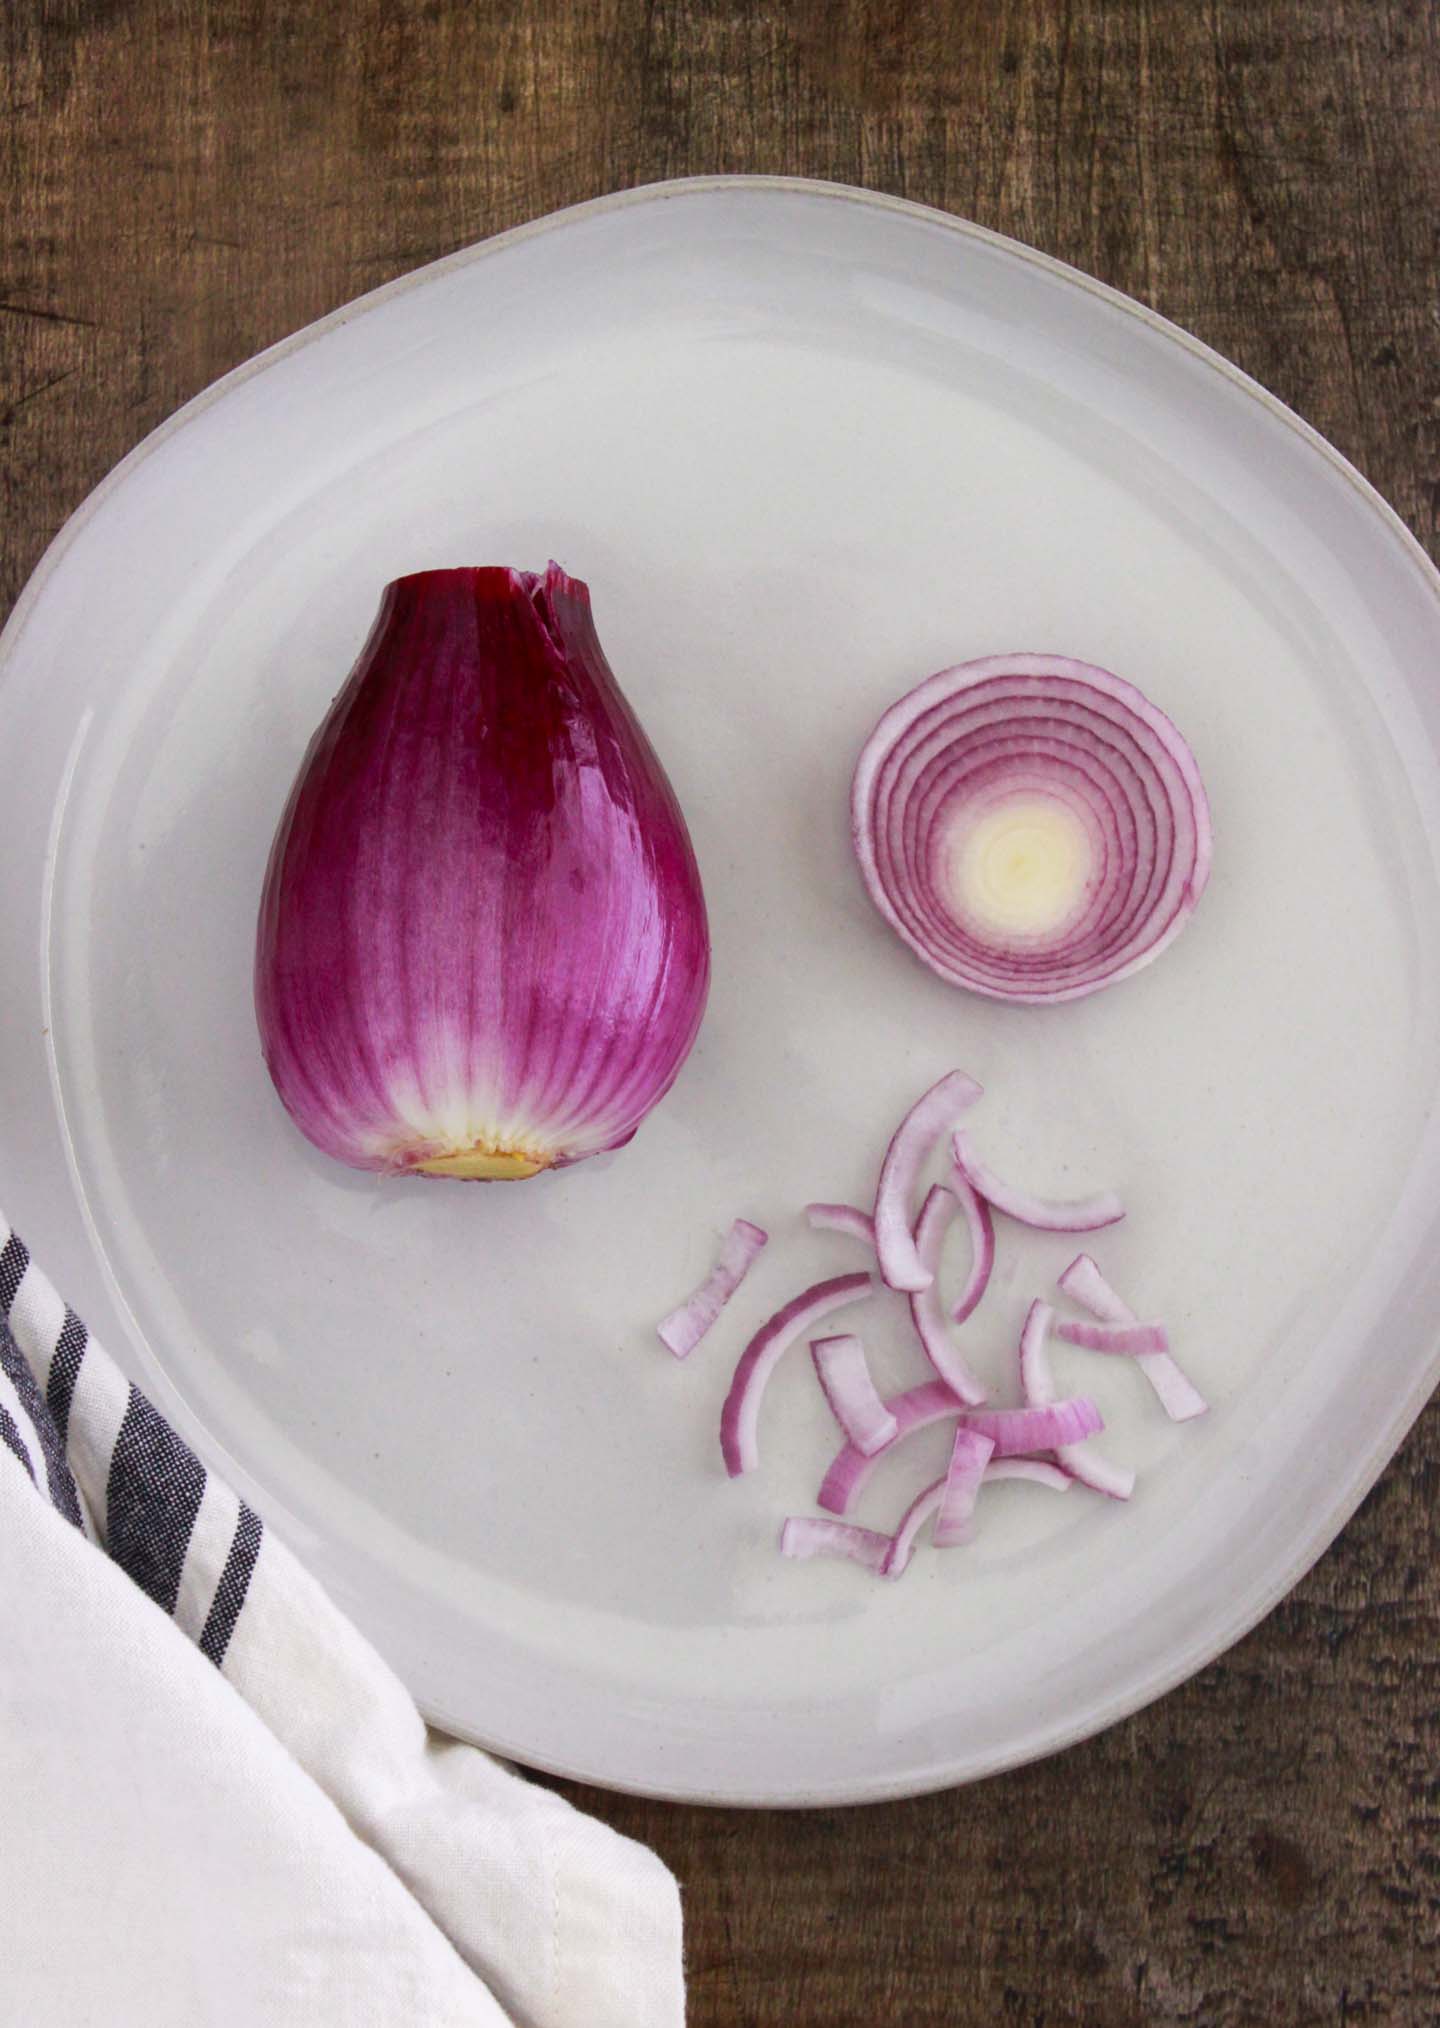 Red onion - photo of it whole, sliced and slivered